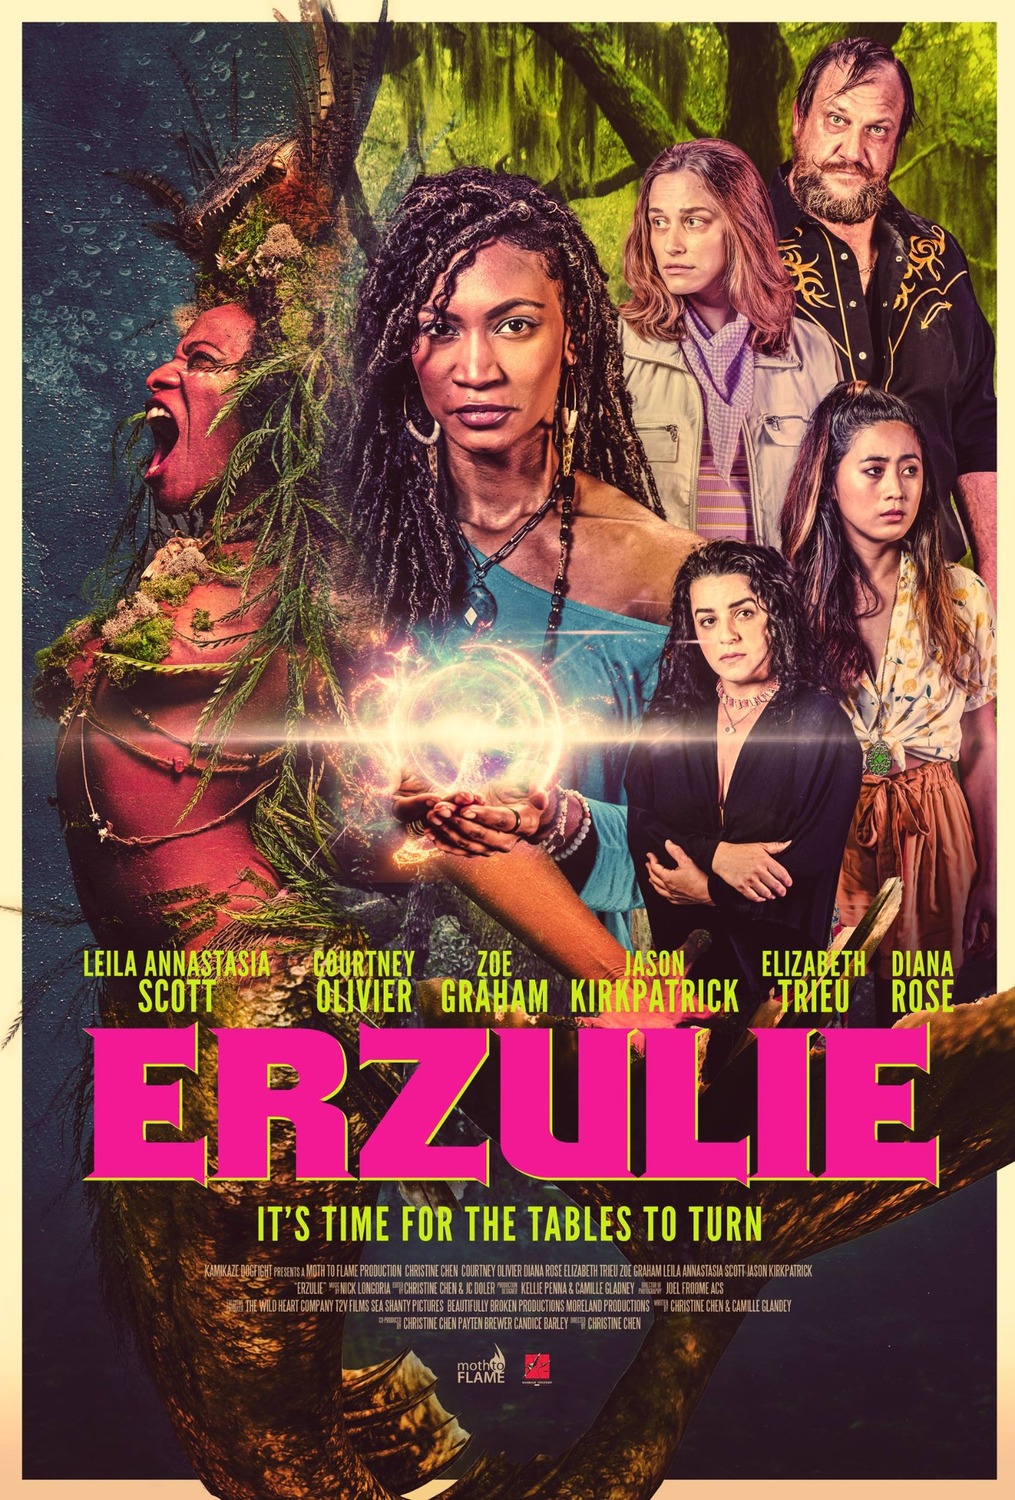 Extra Large Movie Poster Image for Erzulie 